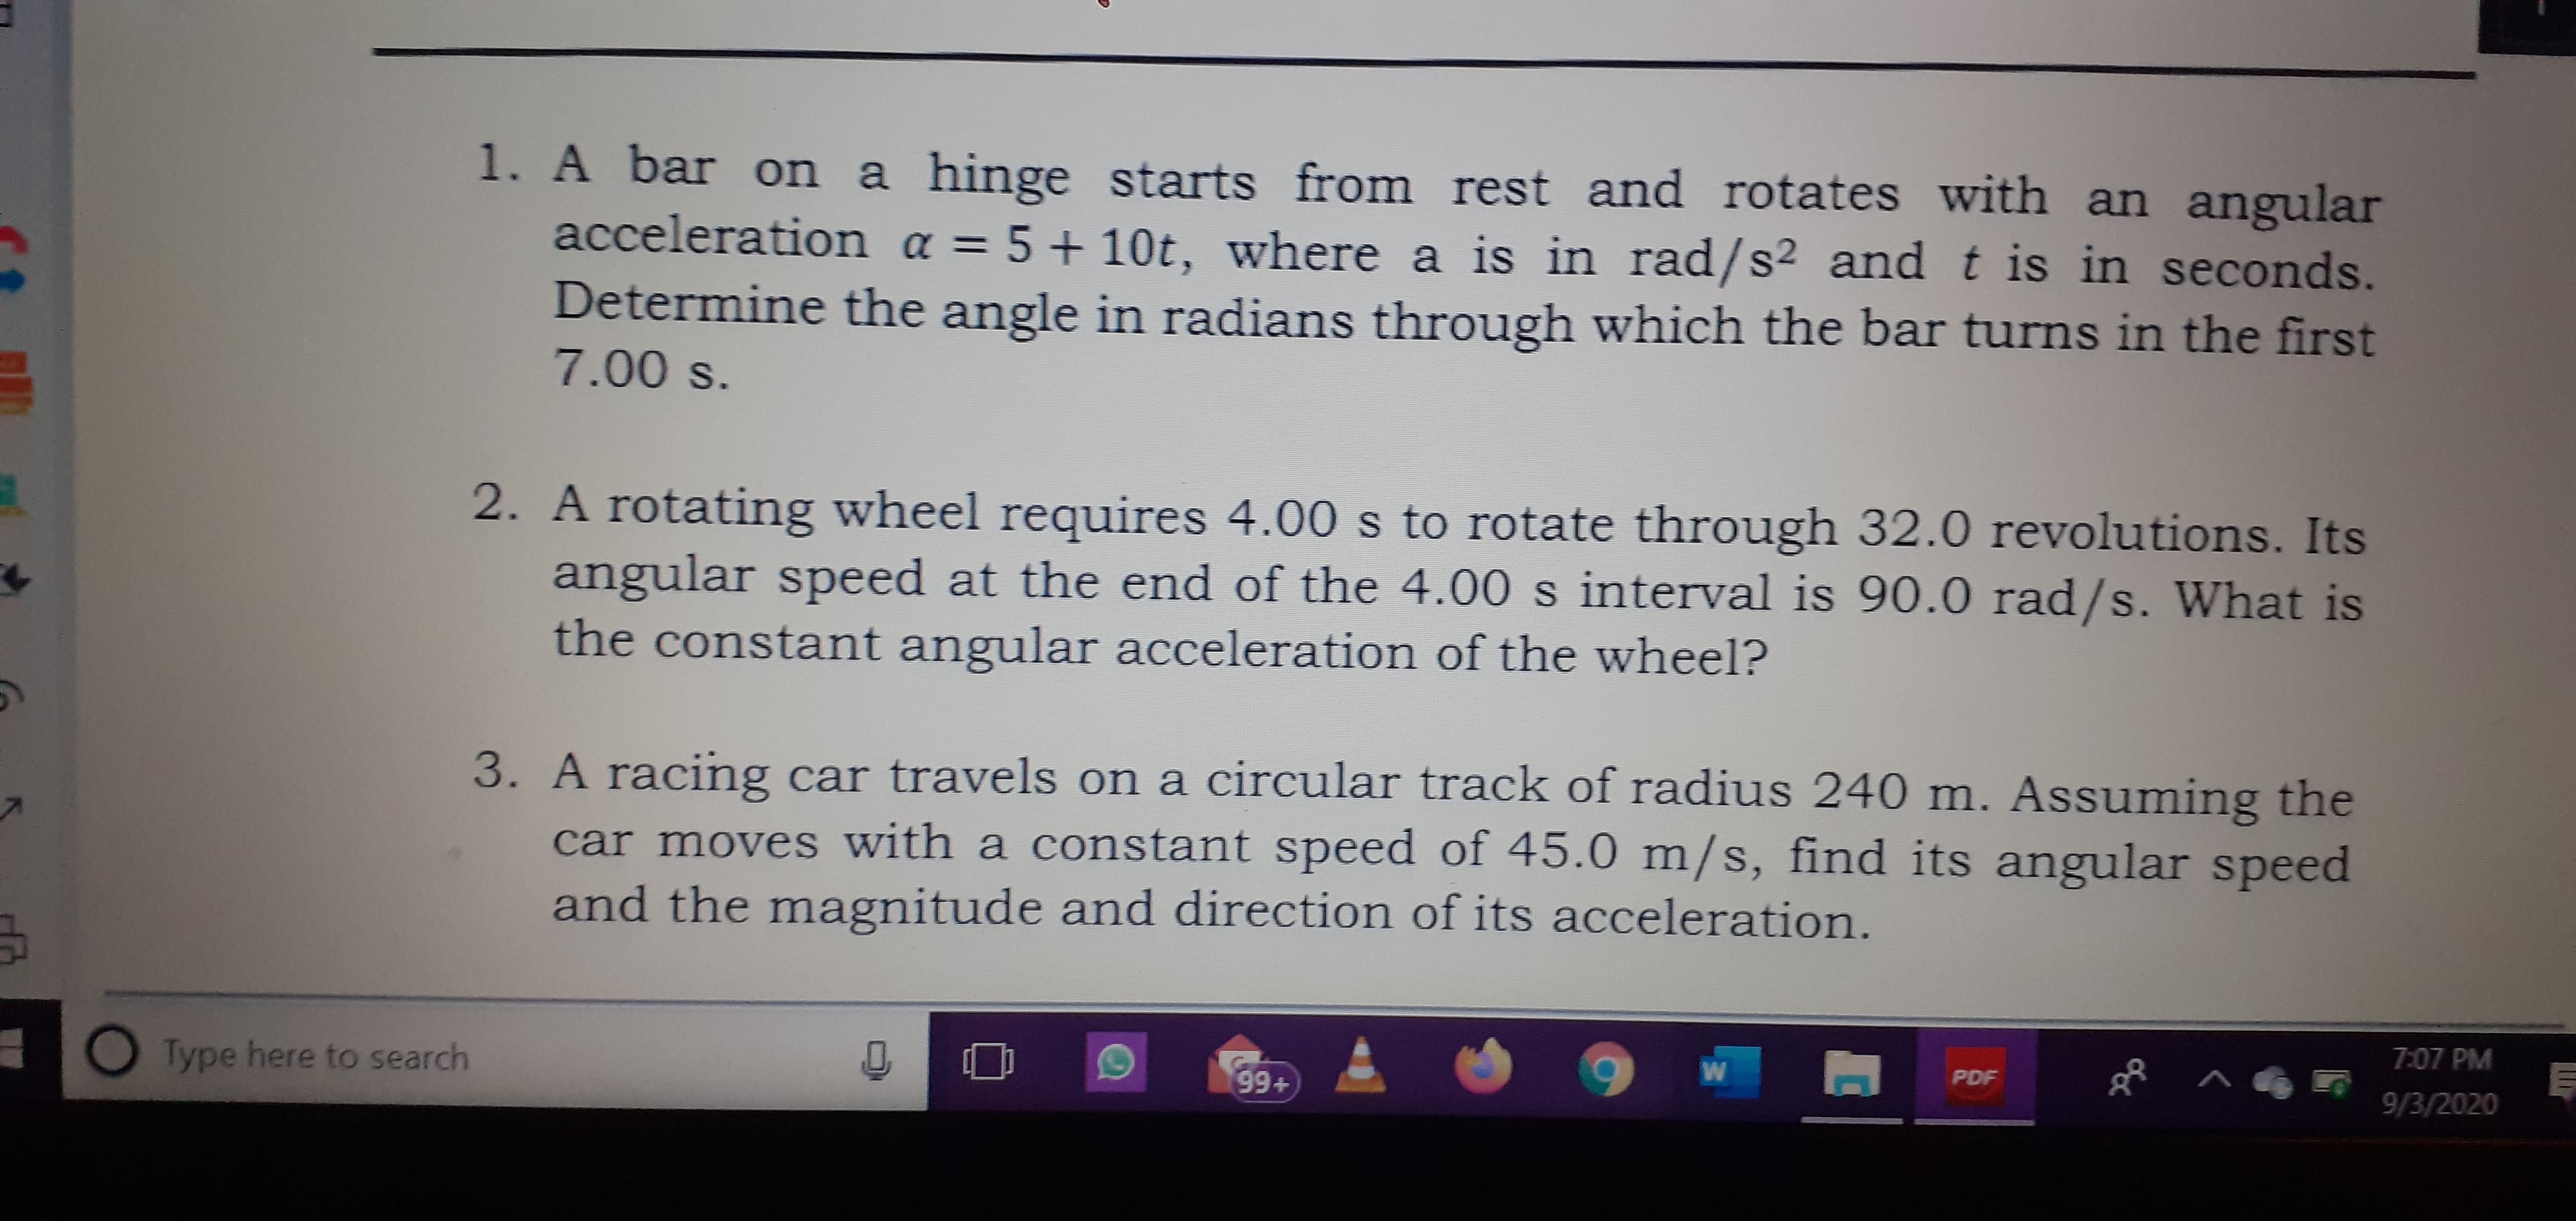 1. A bar on a hinge starts from rest and rotates with an angular
acceleration a = 5+ 10t, where a is in rad/s2 and t is in seconds.
Determine the angle in radians through which the bar turns in the first
7.00 s.
